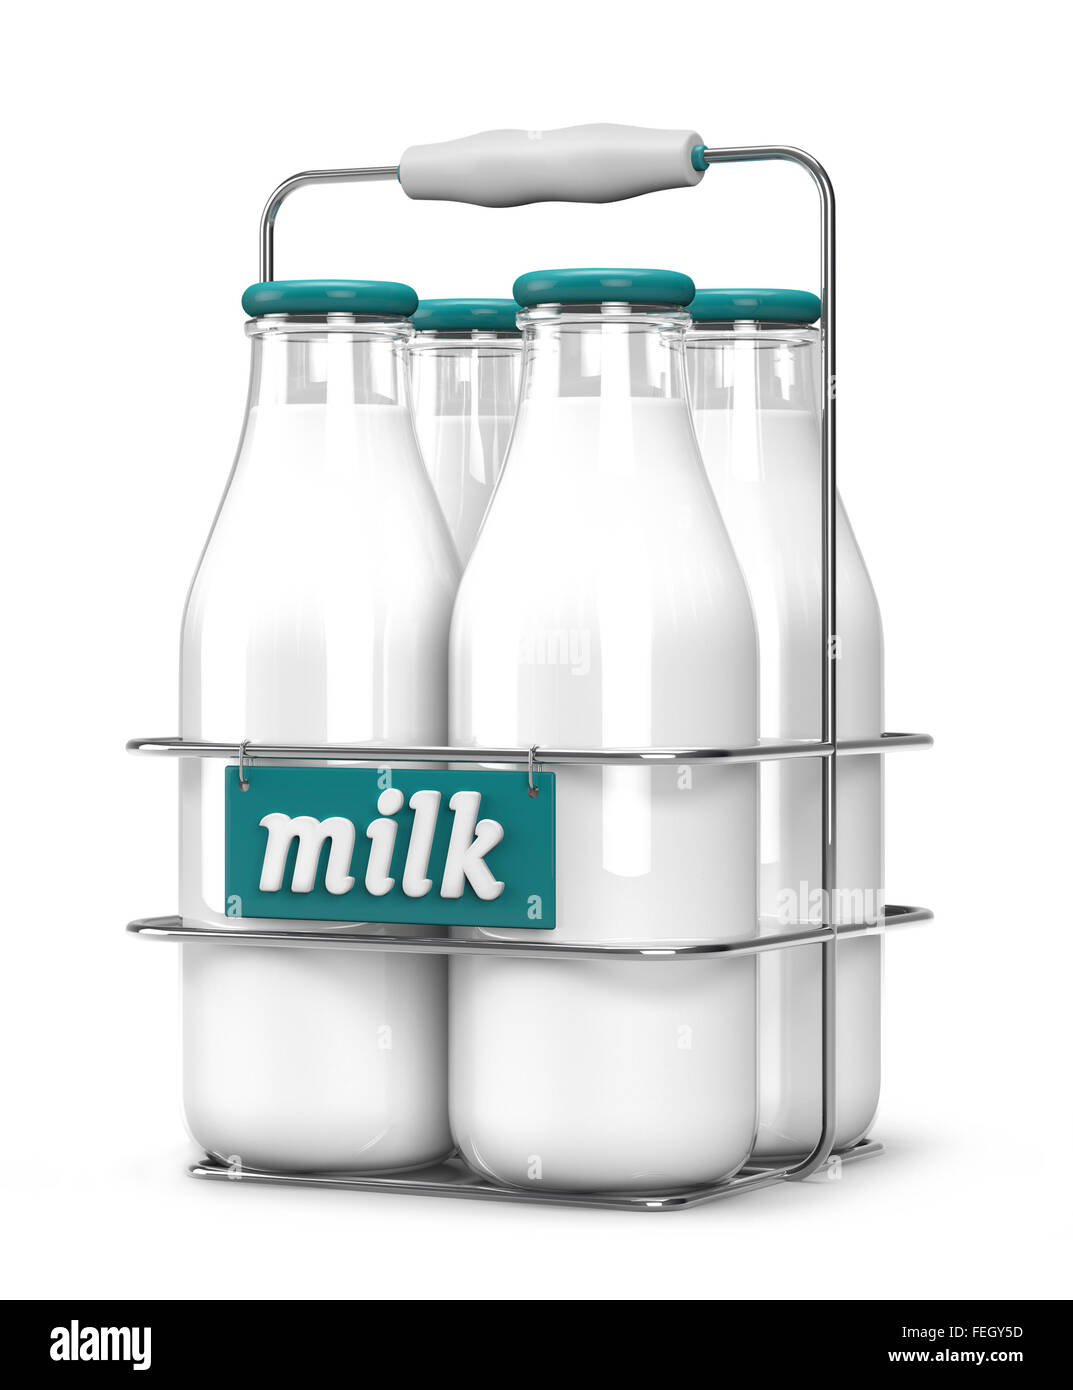 Four glass bottles of milk with light blue caps in a metal carrying case with holder and word milk written on the front isolated Stock Photo